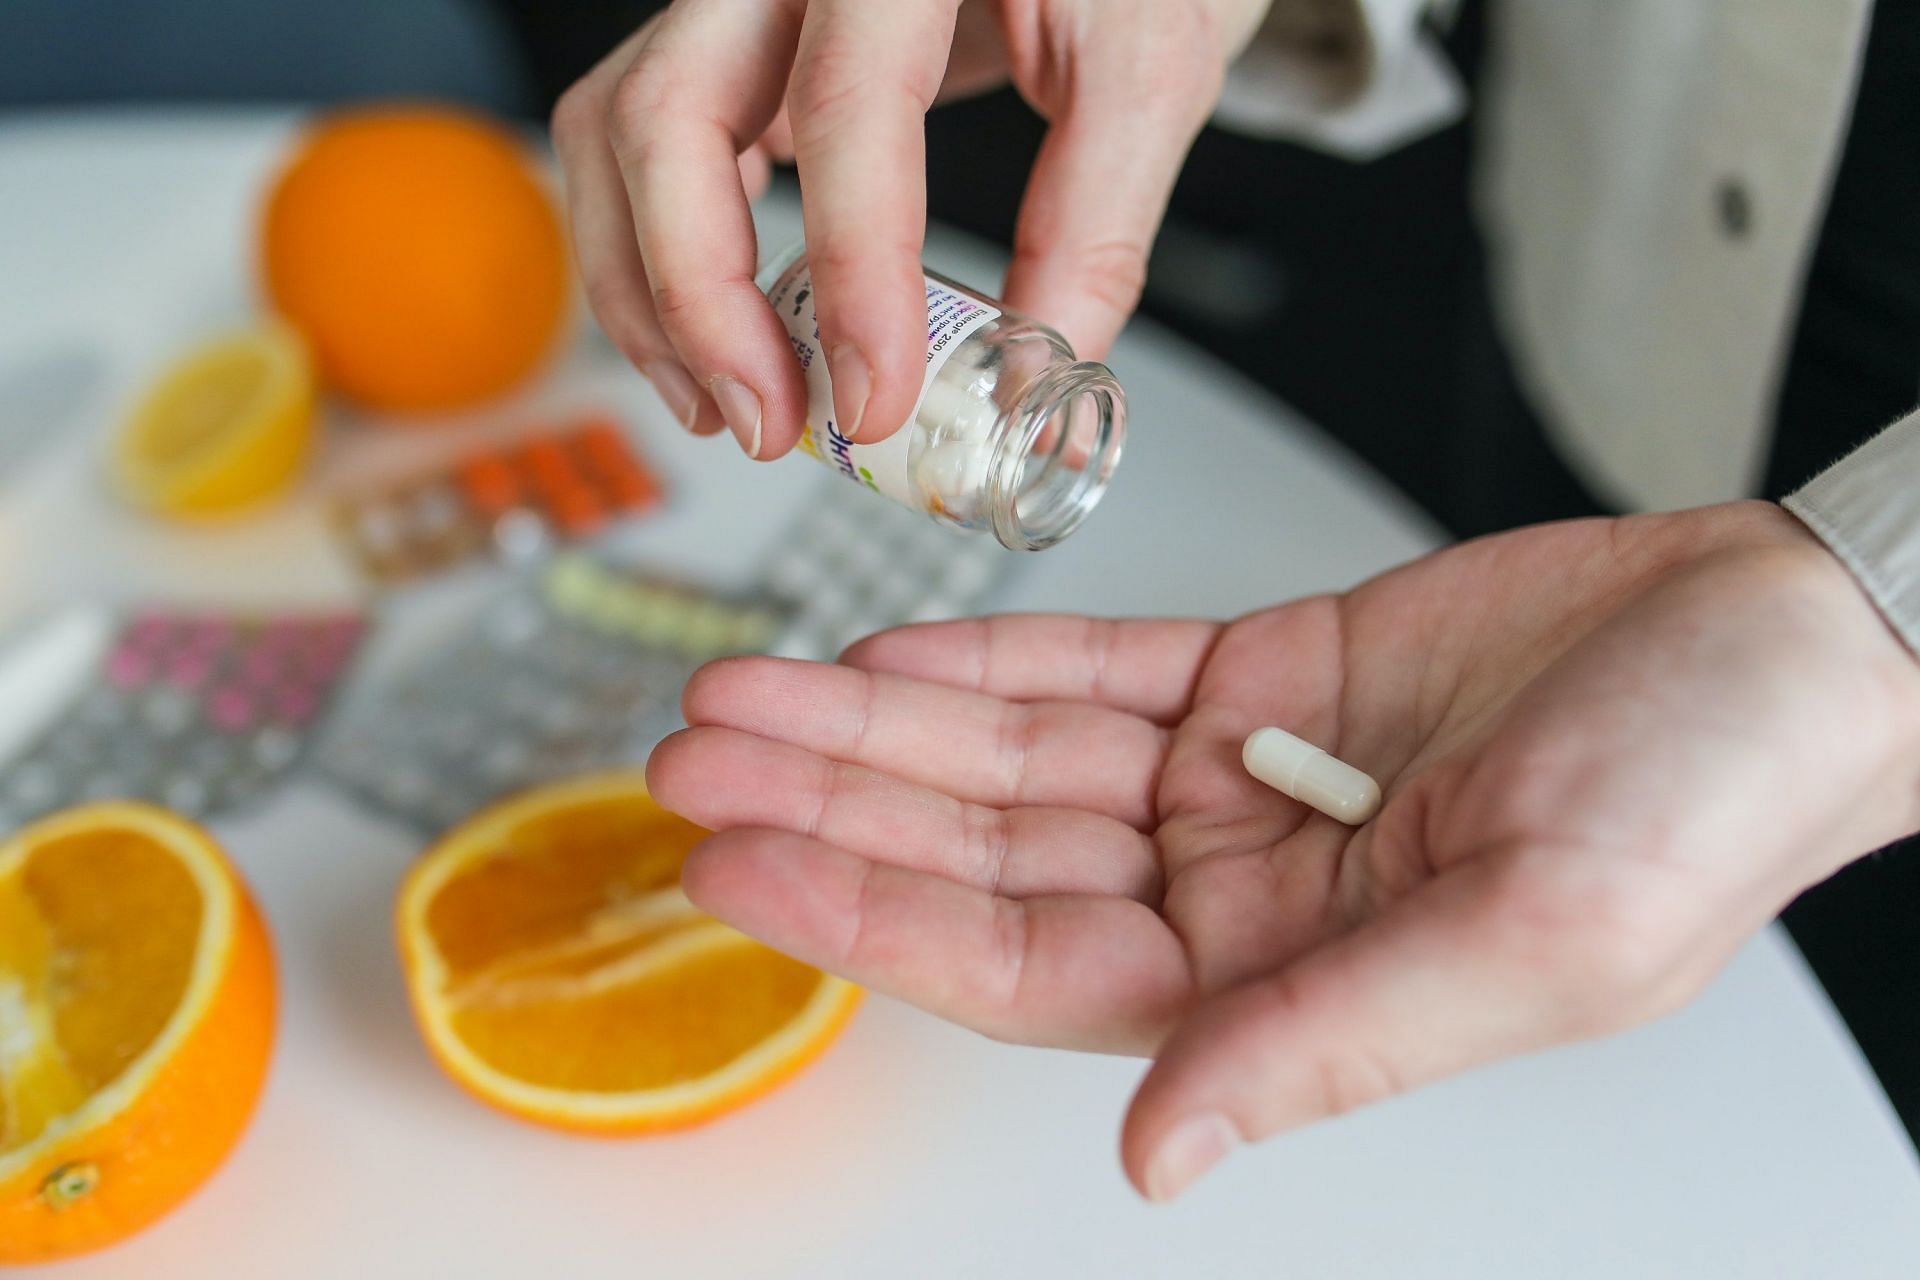 Benefits and Risks of Taking Vitamin Supplements: Are They Really Necessary? (Image via Pexels)